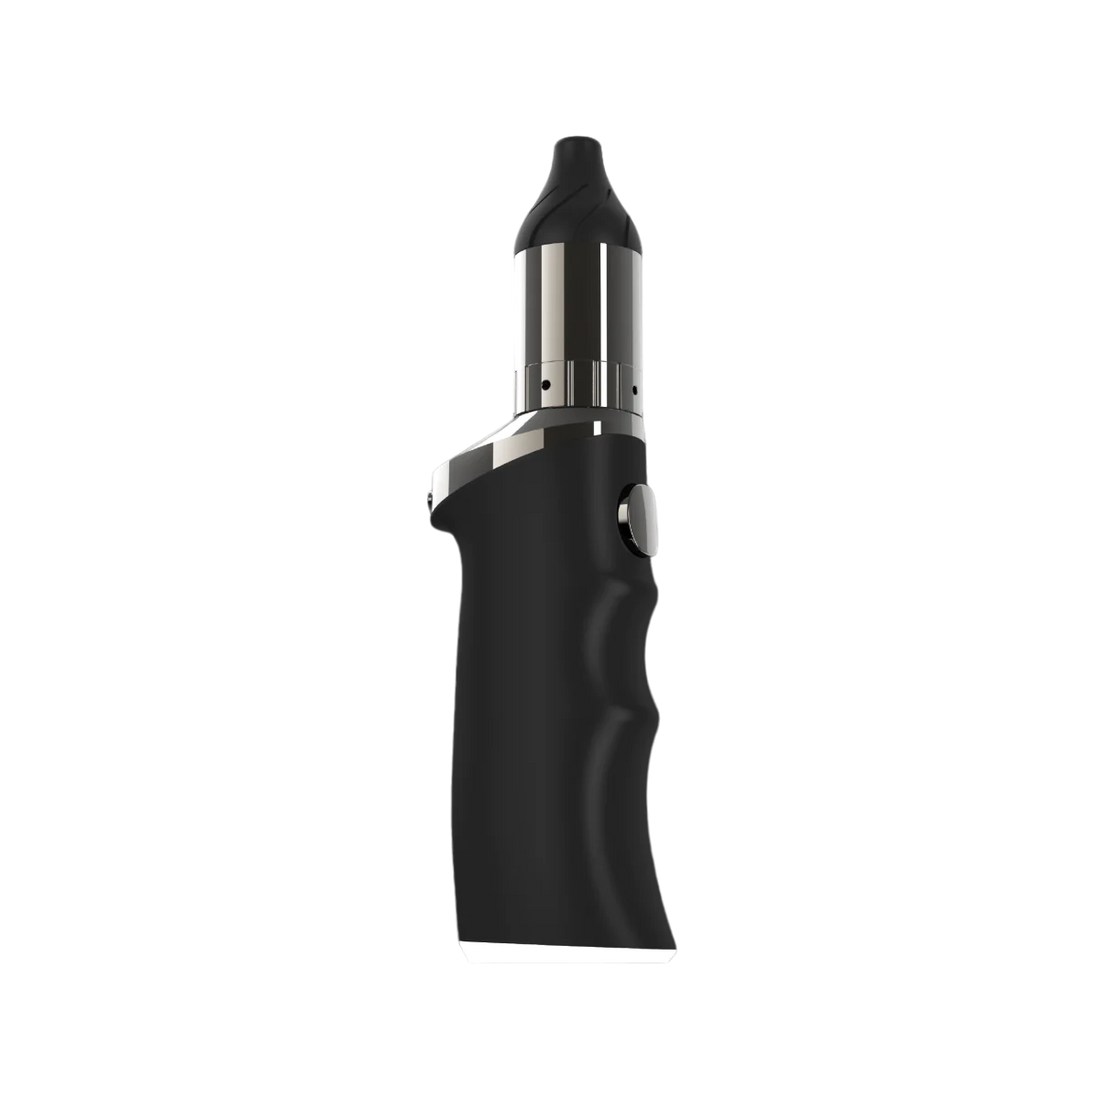 Yocan Black Series - Phaser Ace Concentrate Vaporizer